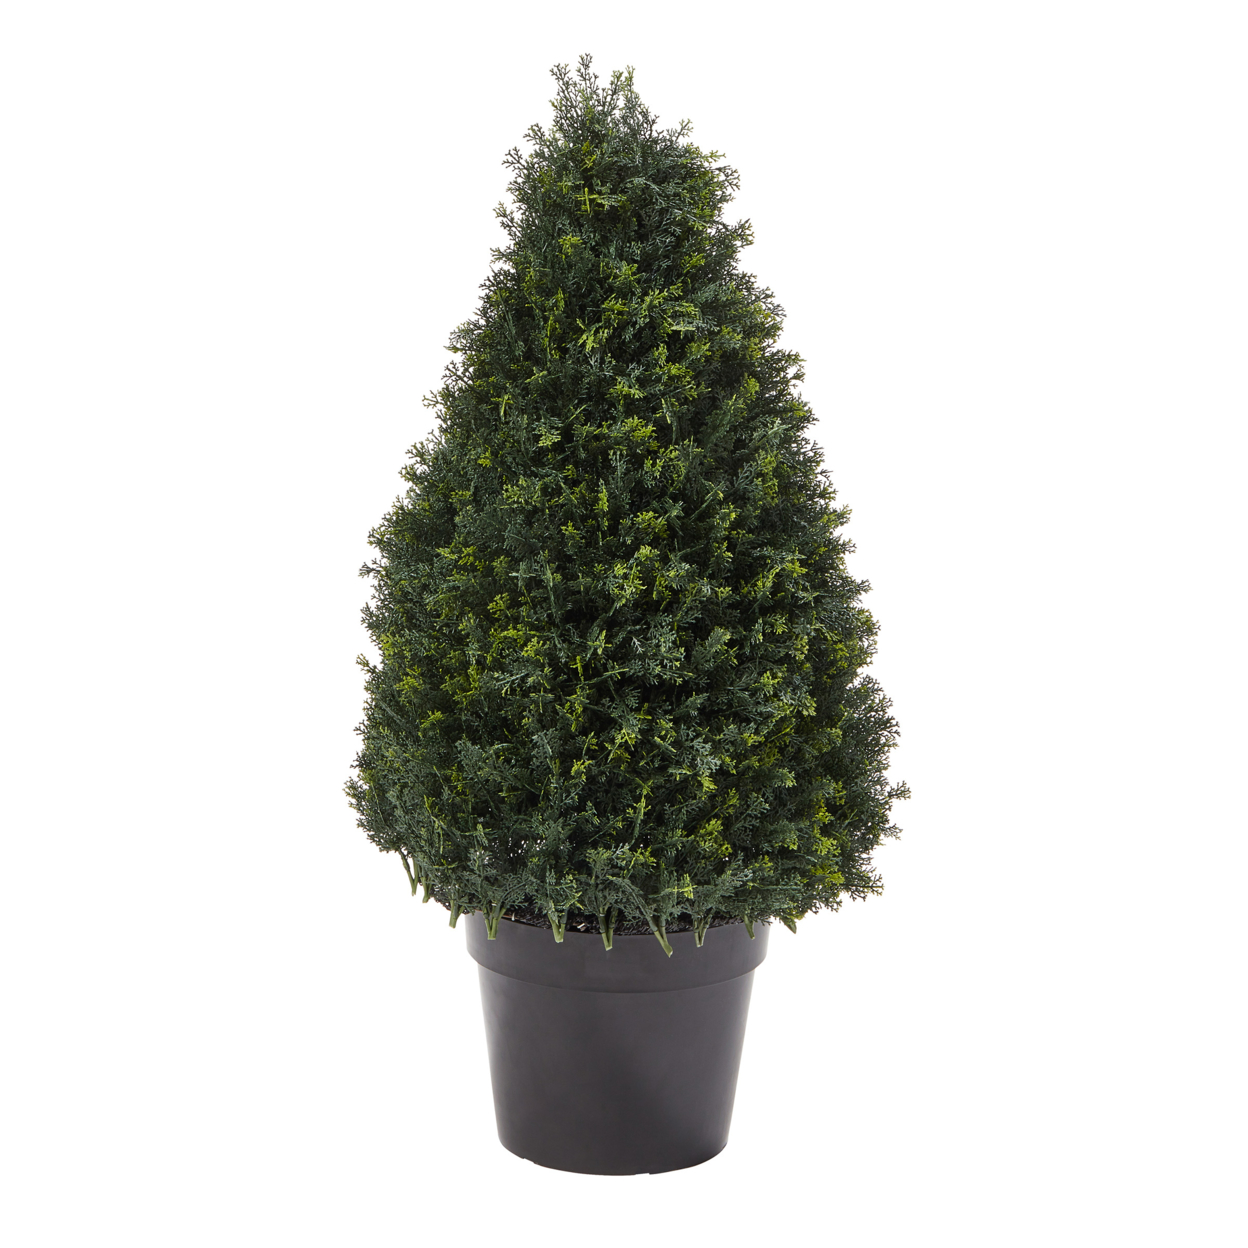 Artificial Cypress Topiary-37 Inch Tower Style Faux Plant In Sturdy Pot - Realistic Indoor Or Outdoor Potted Shrub